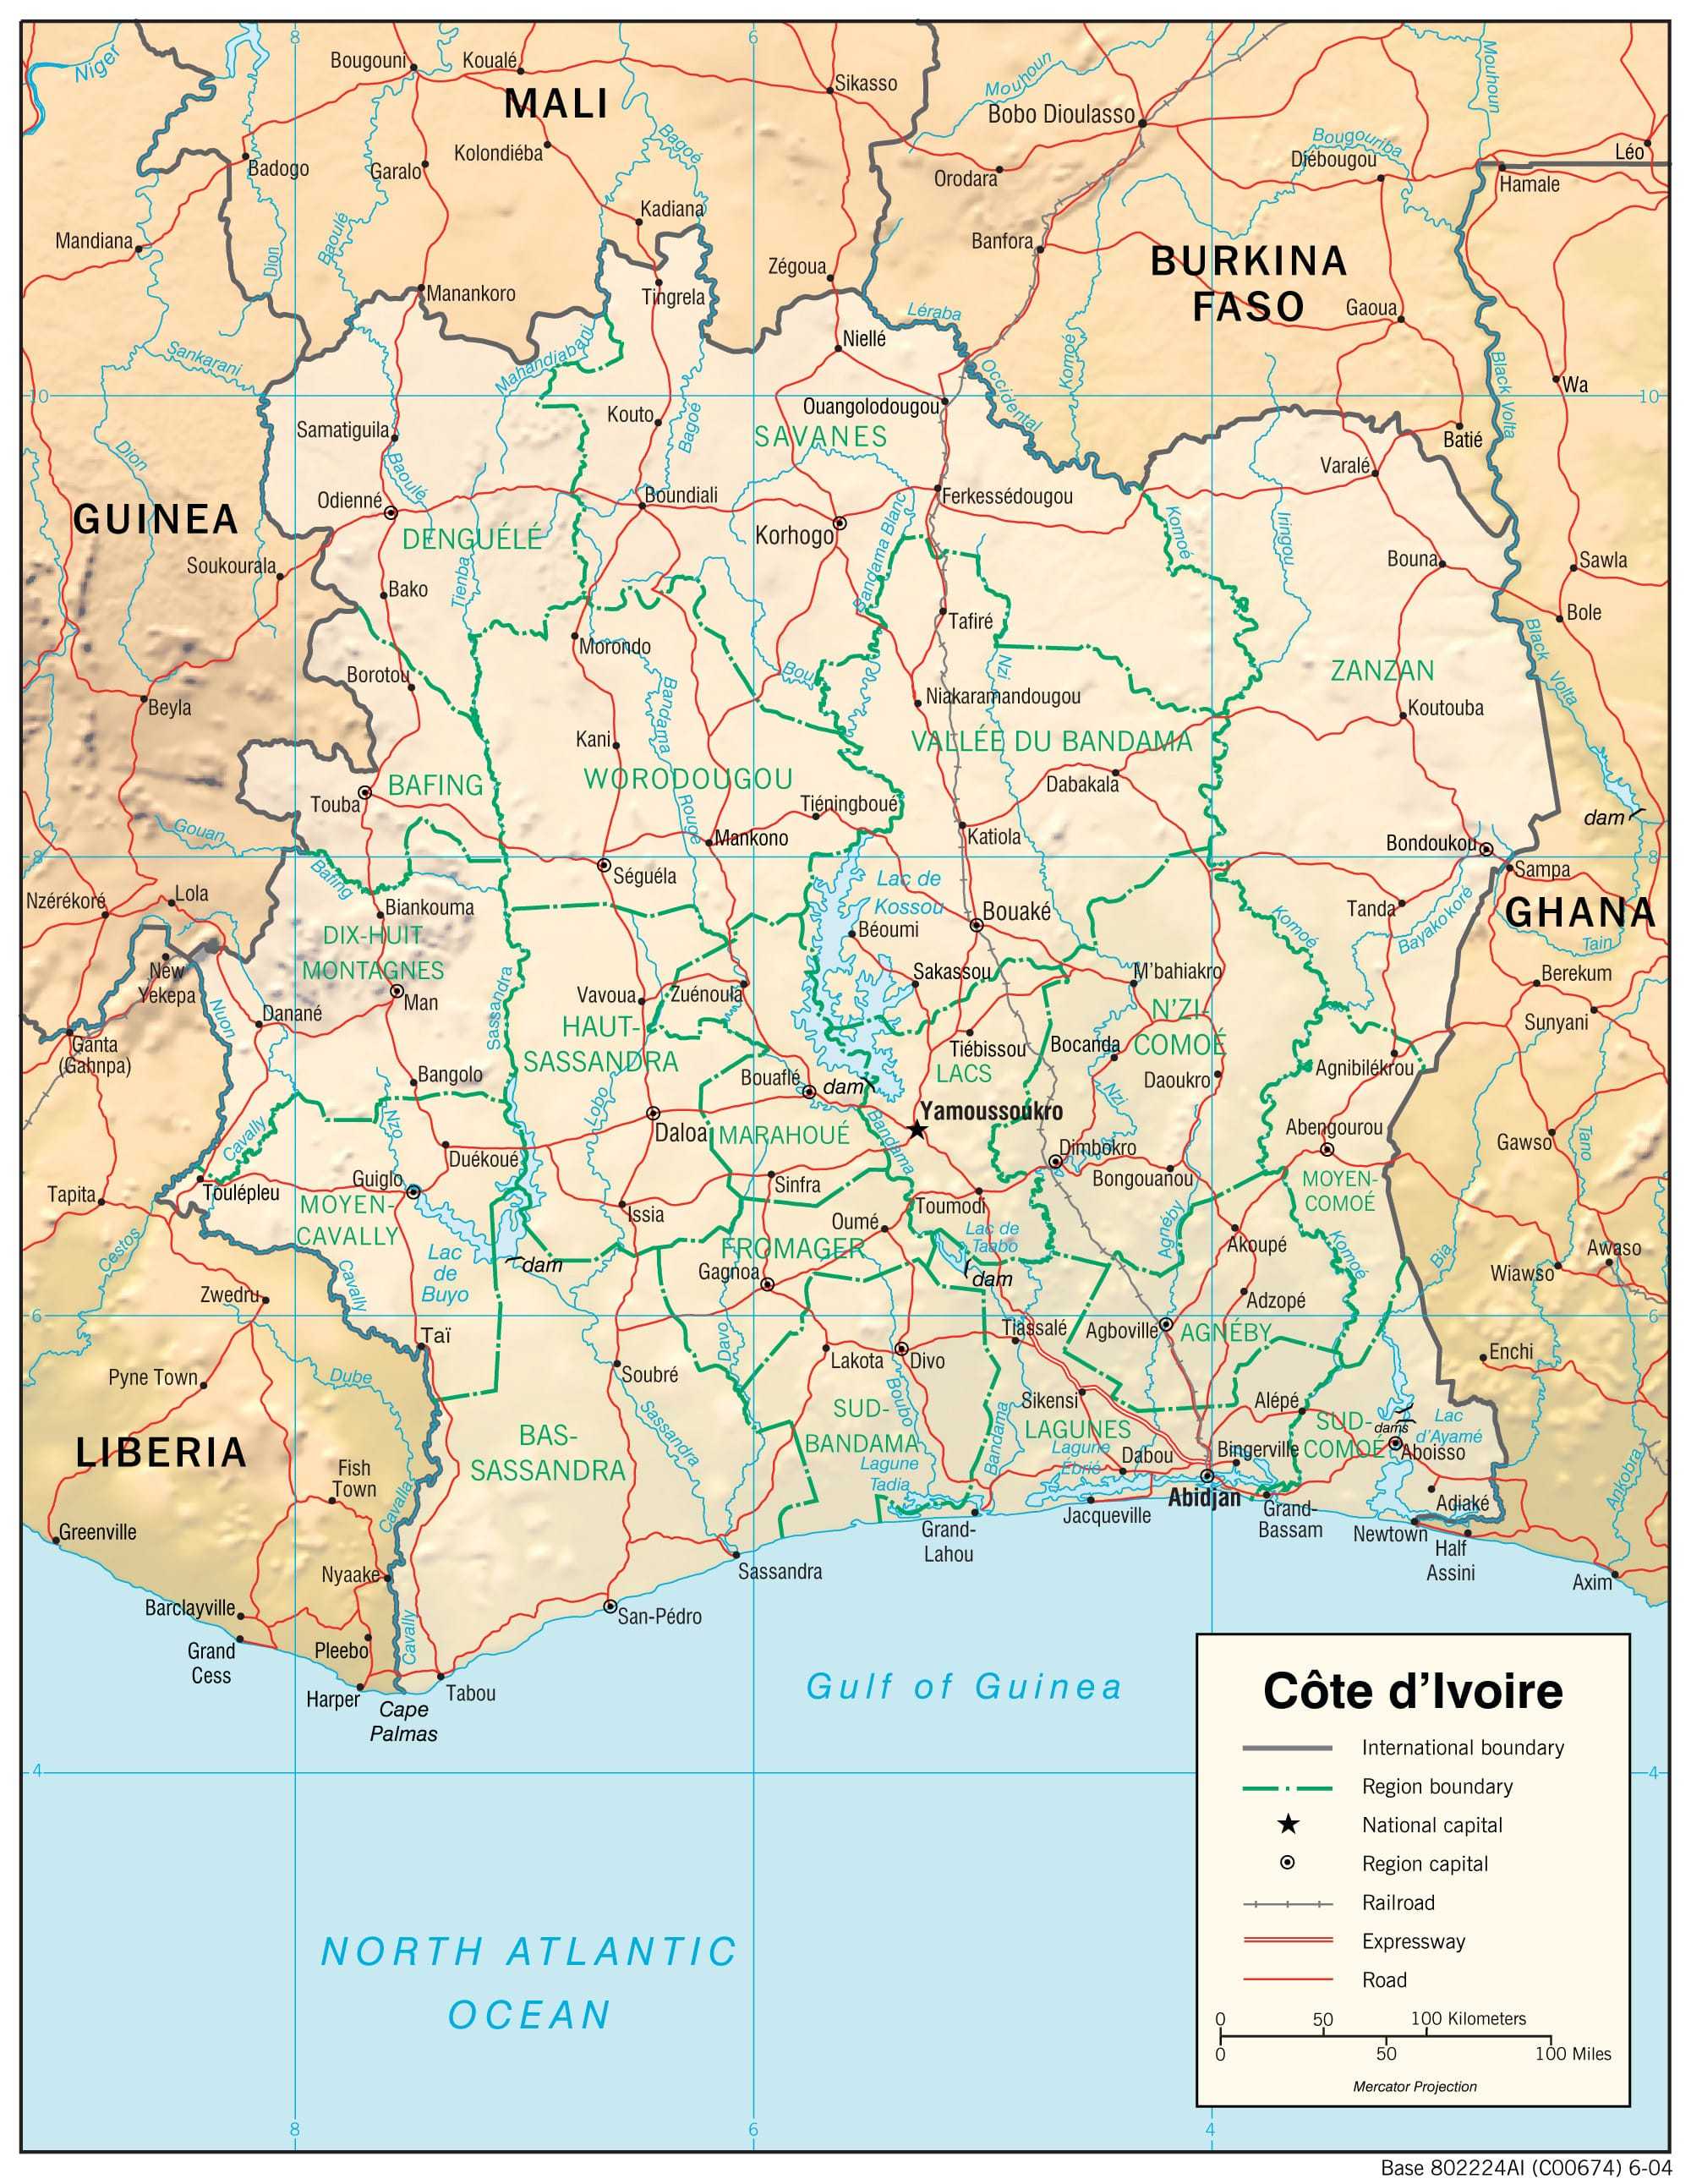 Physiographical map of Cote d'Ivoire